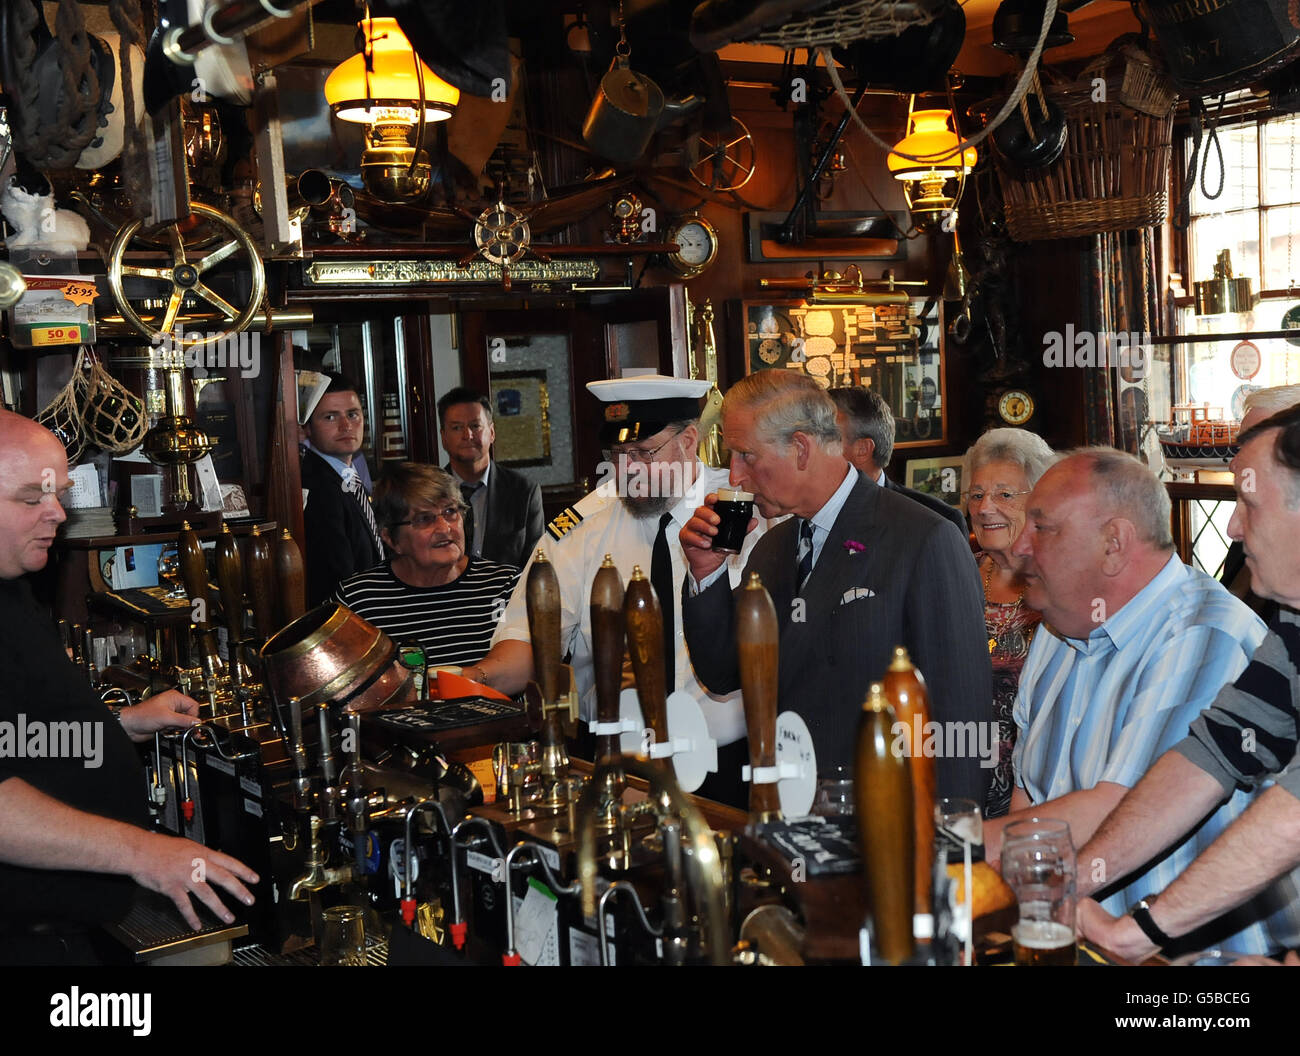 The Prince of Wales enjoys a drink with the locals in the Olde Ship Inn, Seahouses, Northumberland during the second day of his tour of the north east. Stock Photo